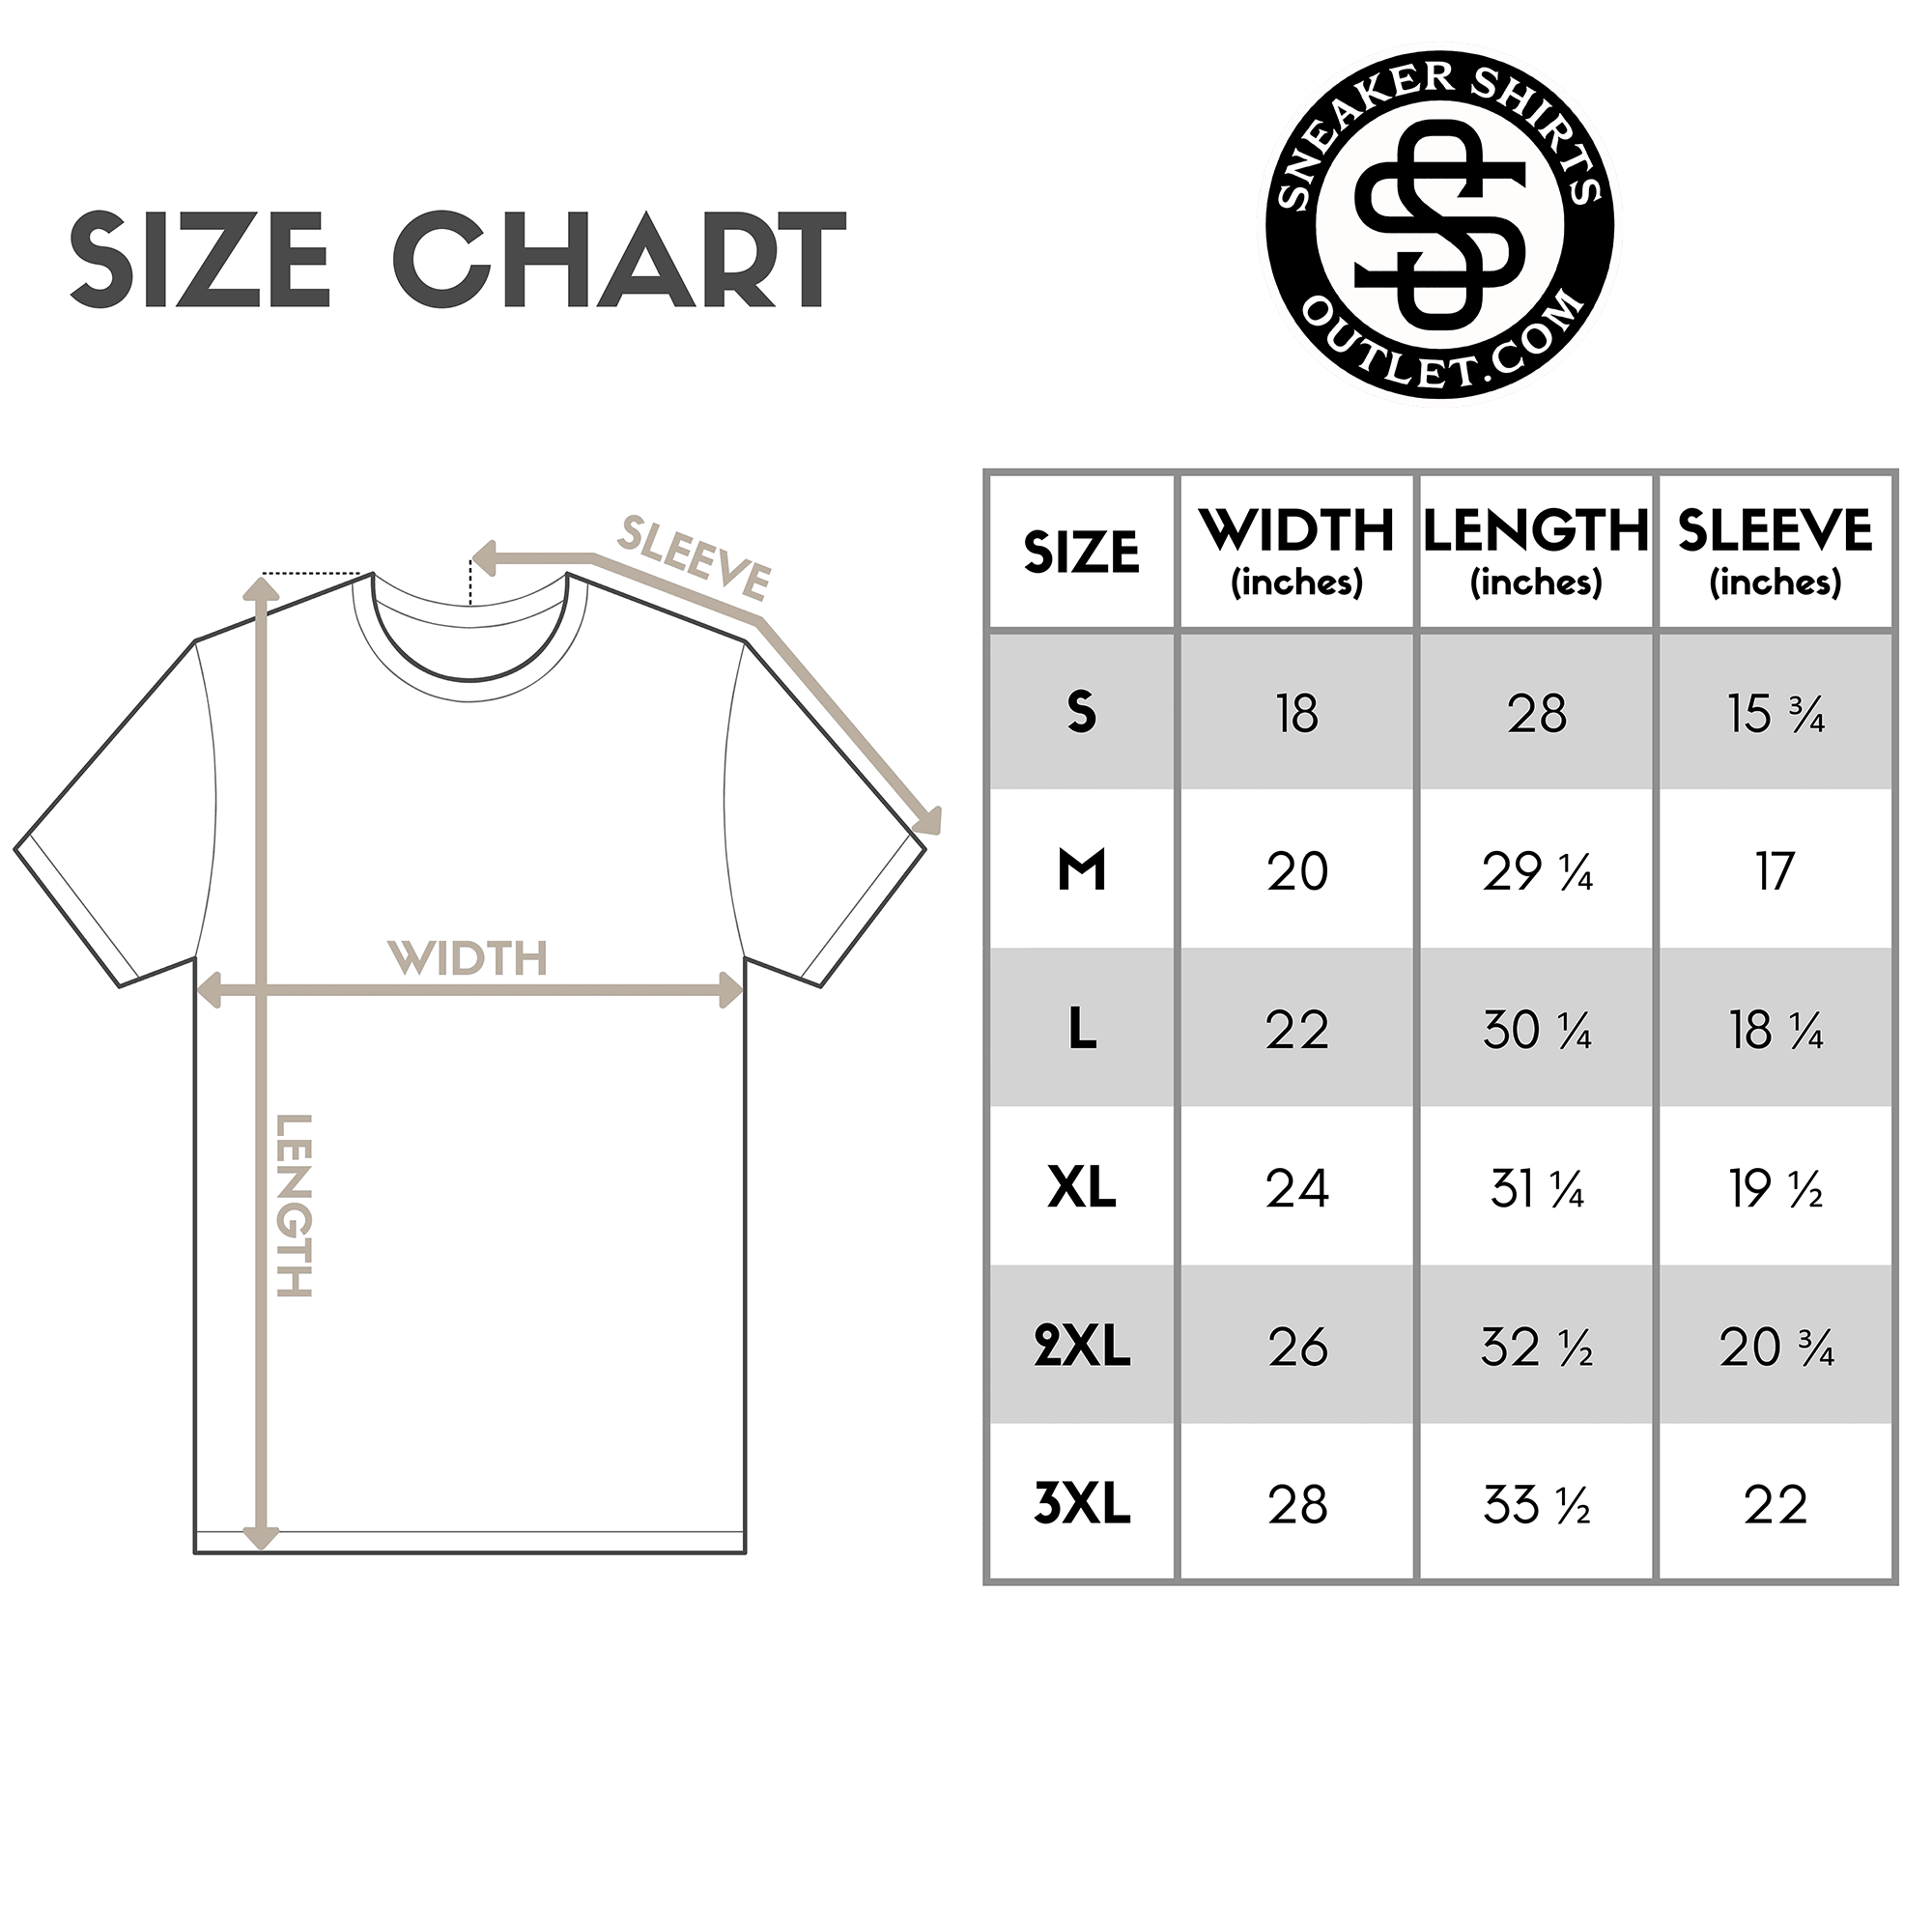 size chart for Medusa Shirt Yeezy Boost 350 V2s Sand Taupe photo